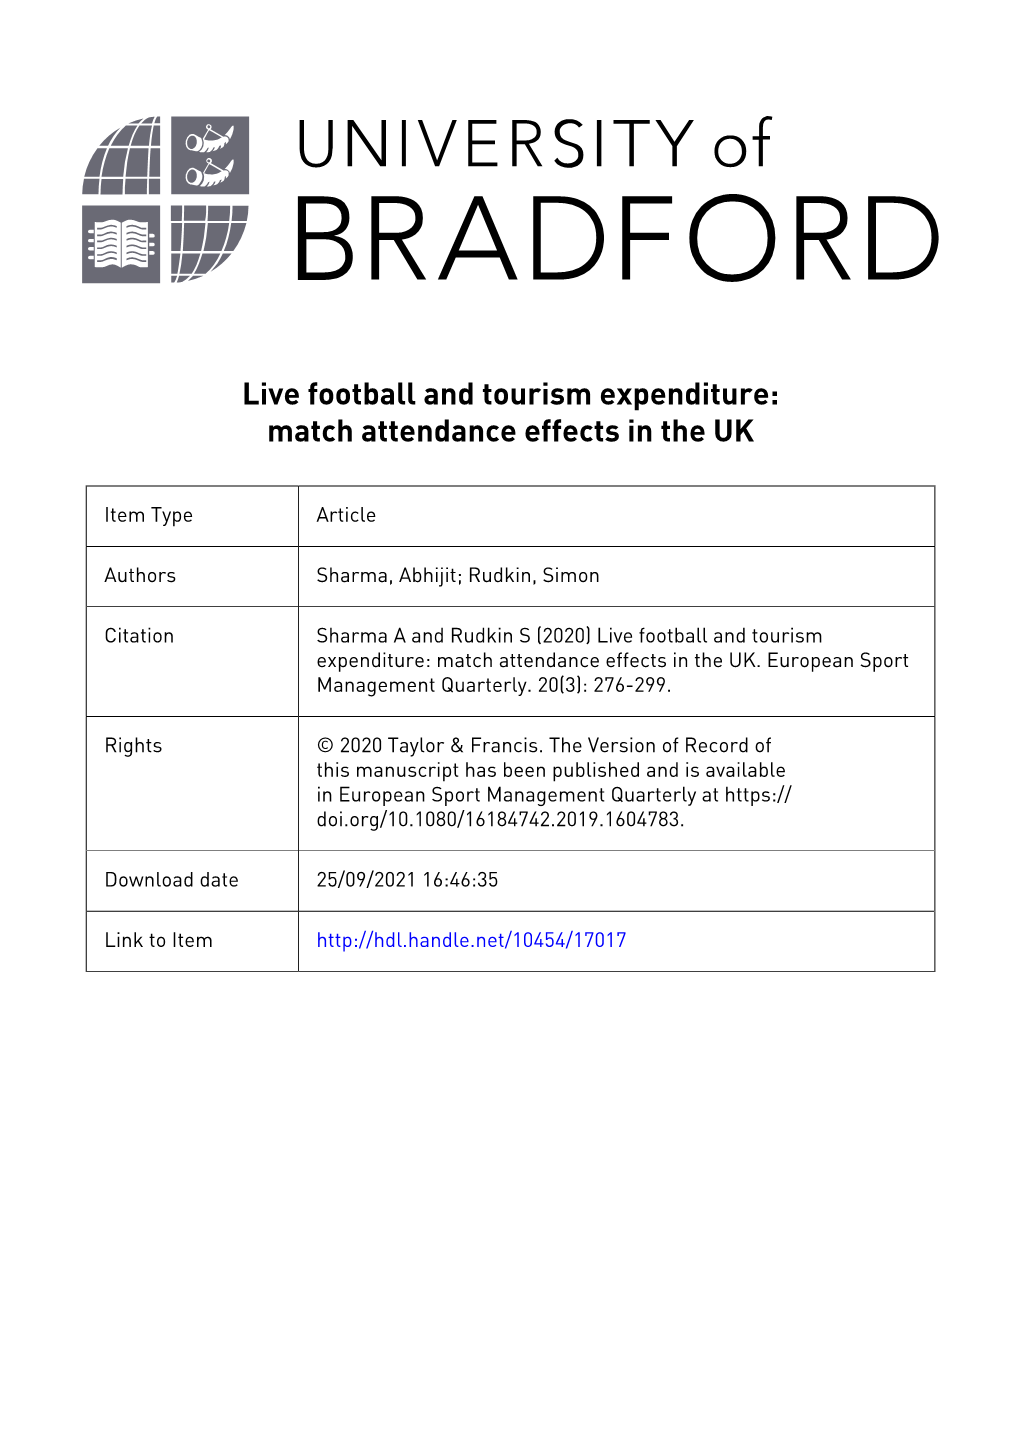 Live Football and Tourism Expenditure: Match Attendance Effects in the UK